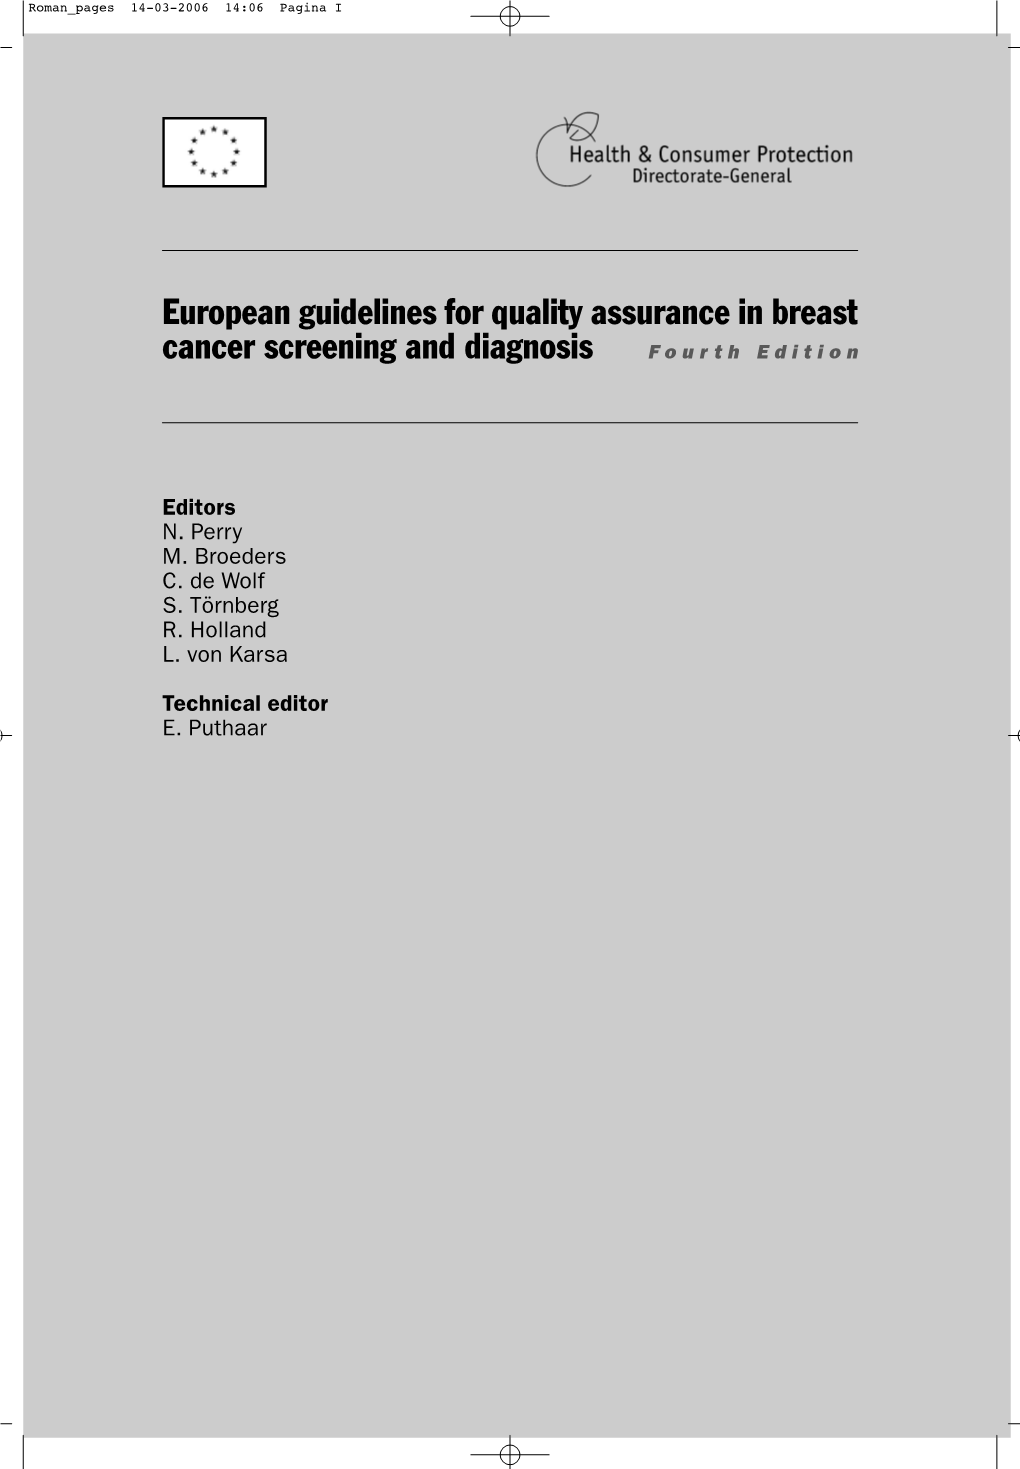 European Guidelines for Quality Assurance in Breast Cancer Screening and Diagnosis Fourth Edition